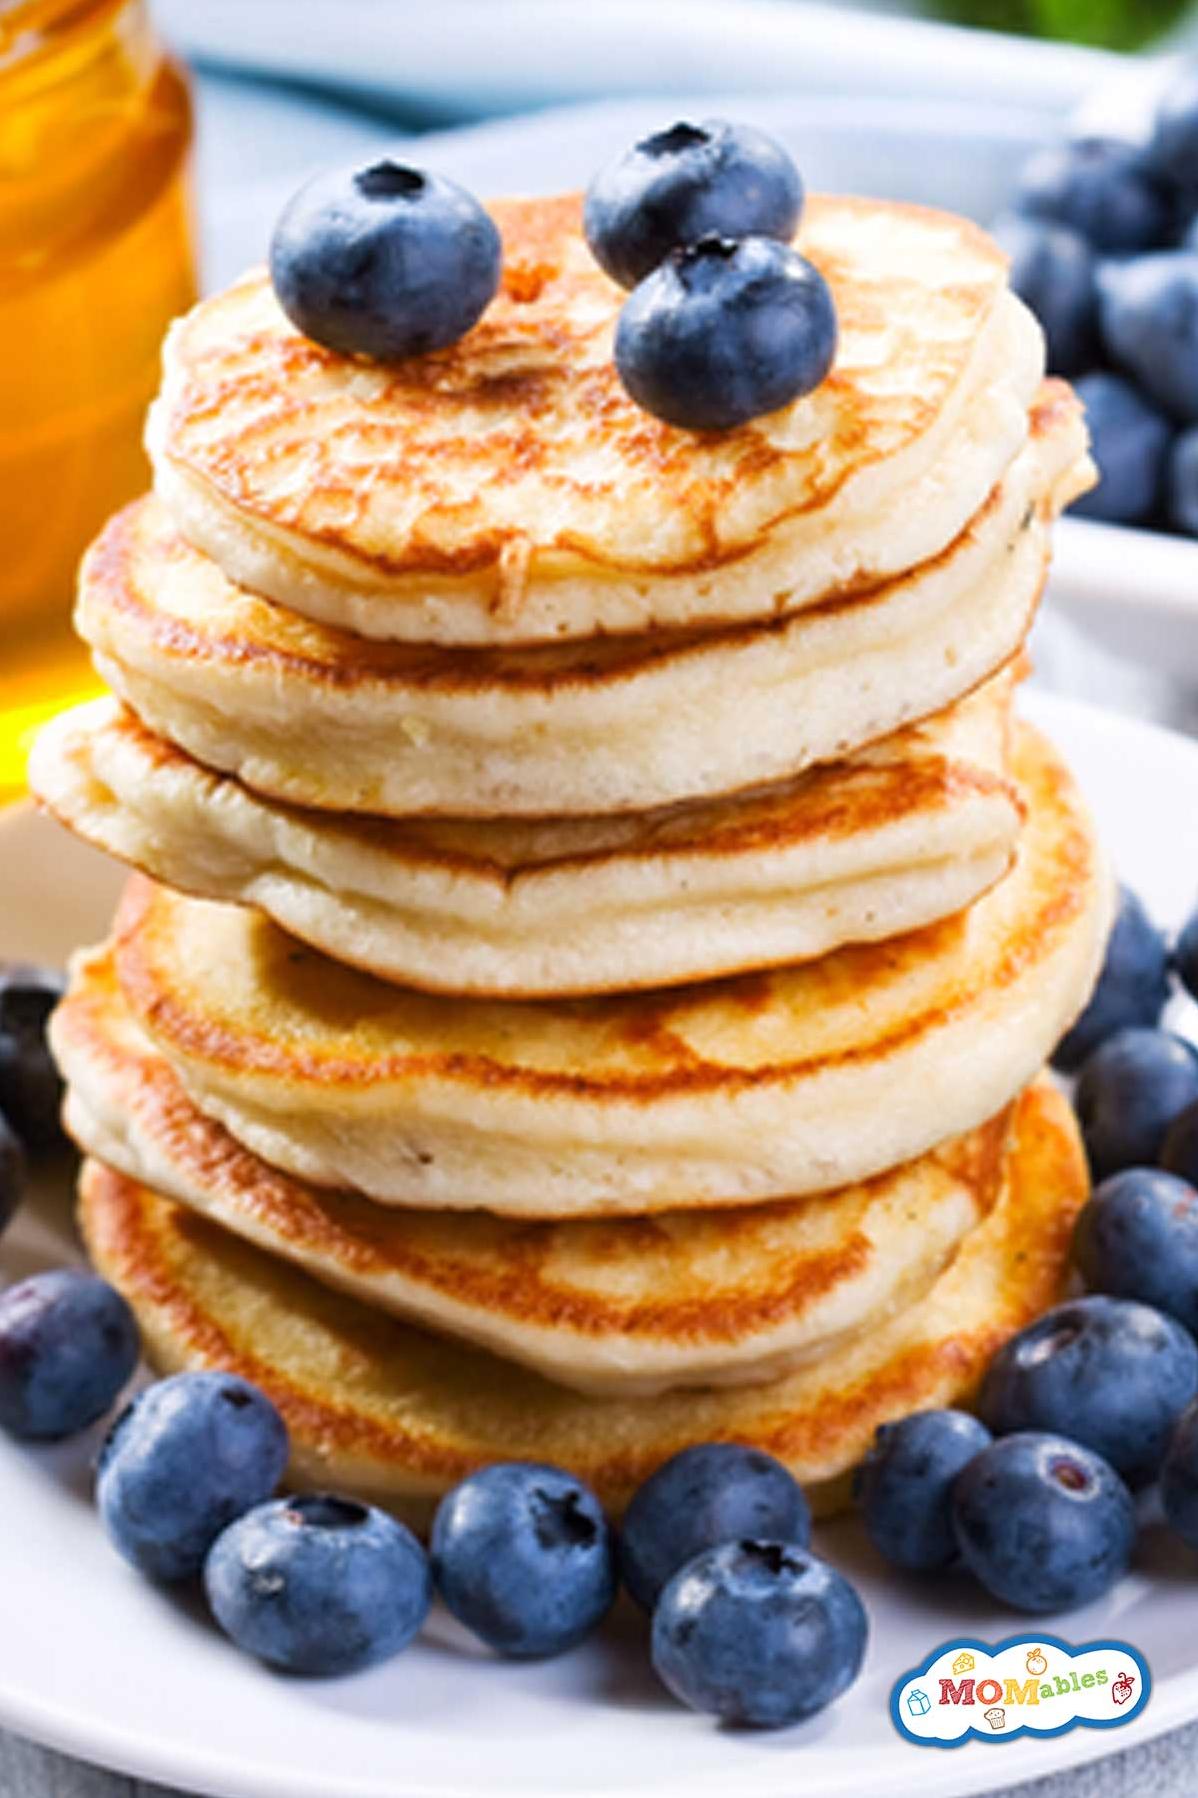  Breakfast just got a whole lot better with these fluffy and wholesome pancakes!